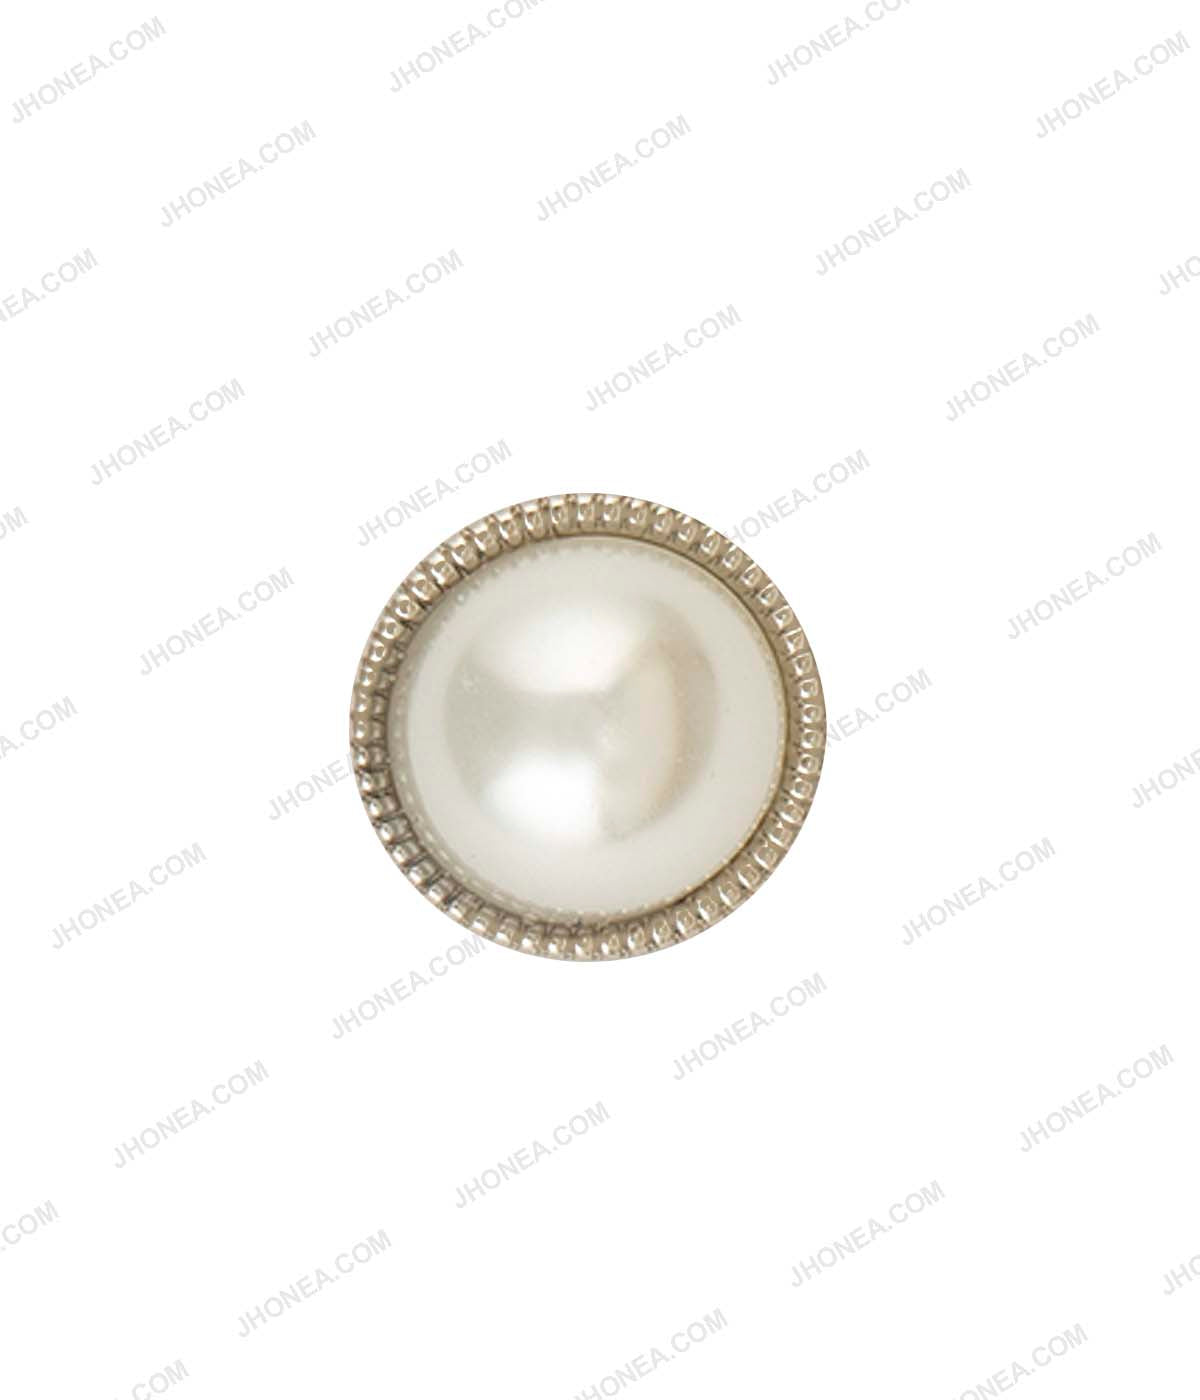 Shiny Silver Accent Border Dome Pearl Buttons